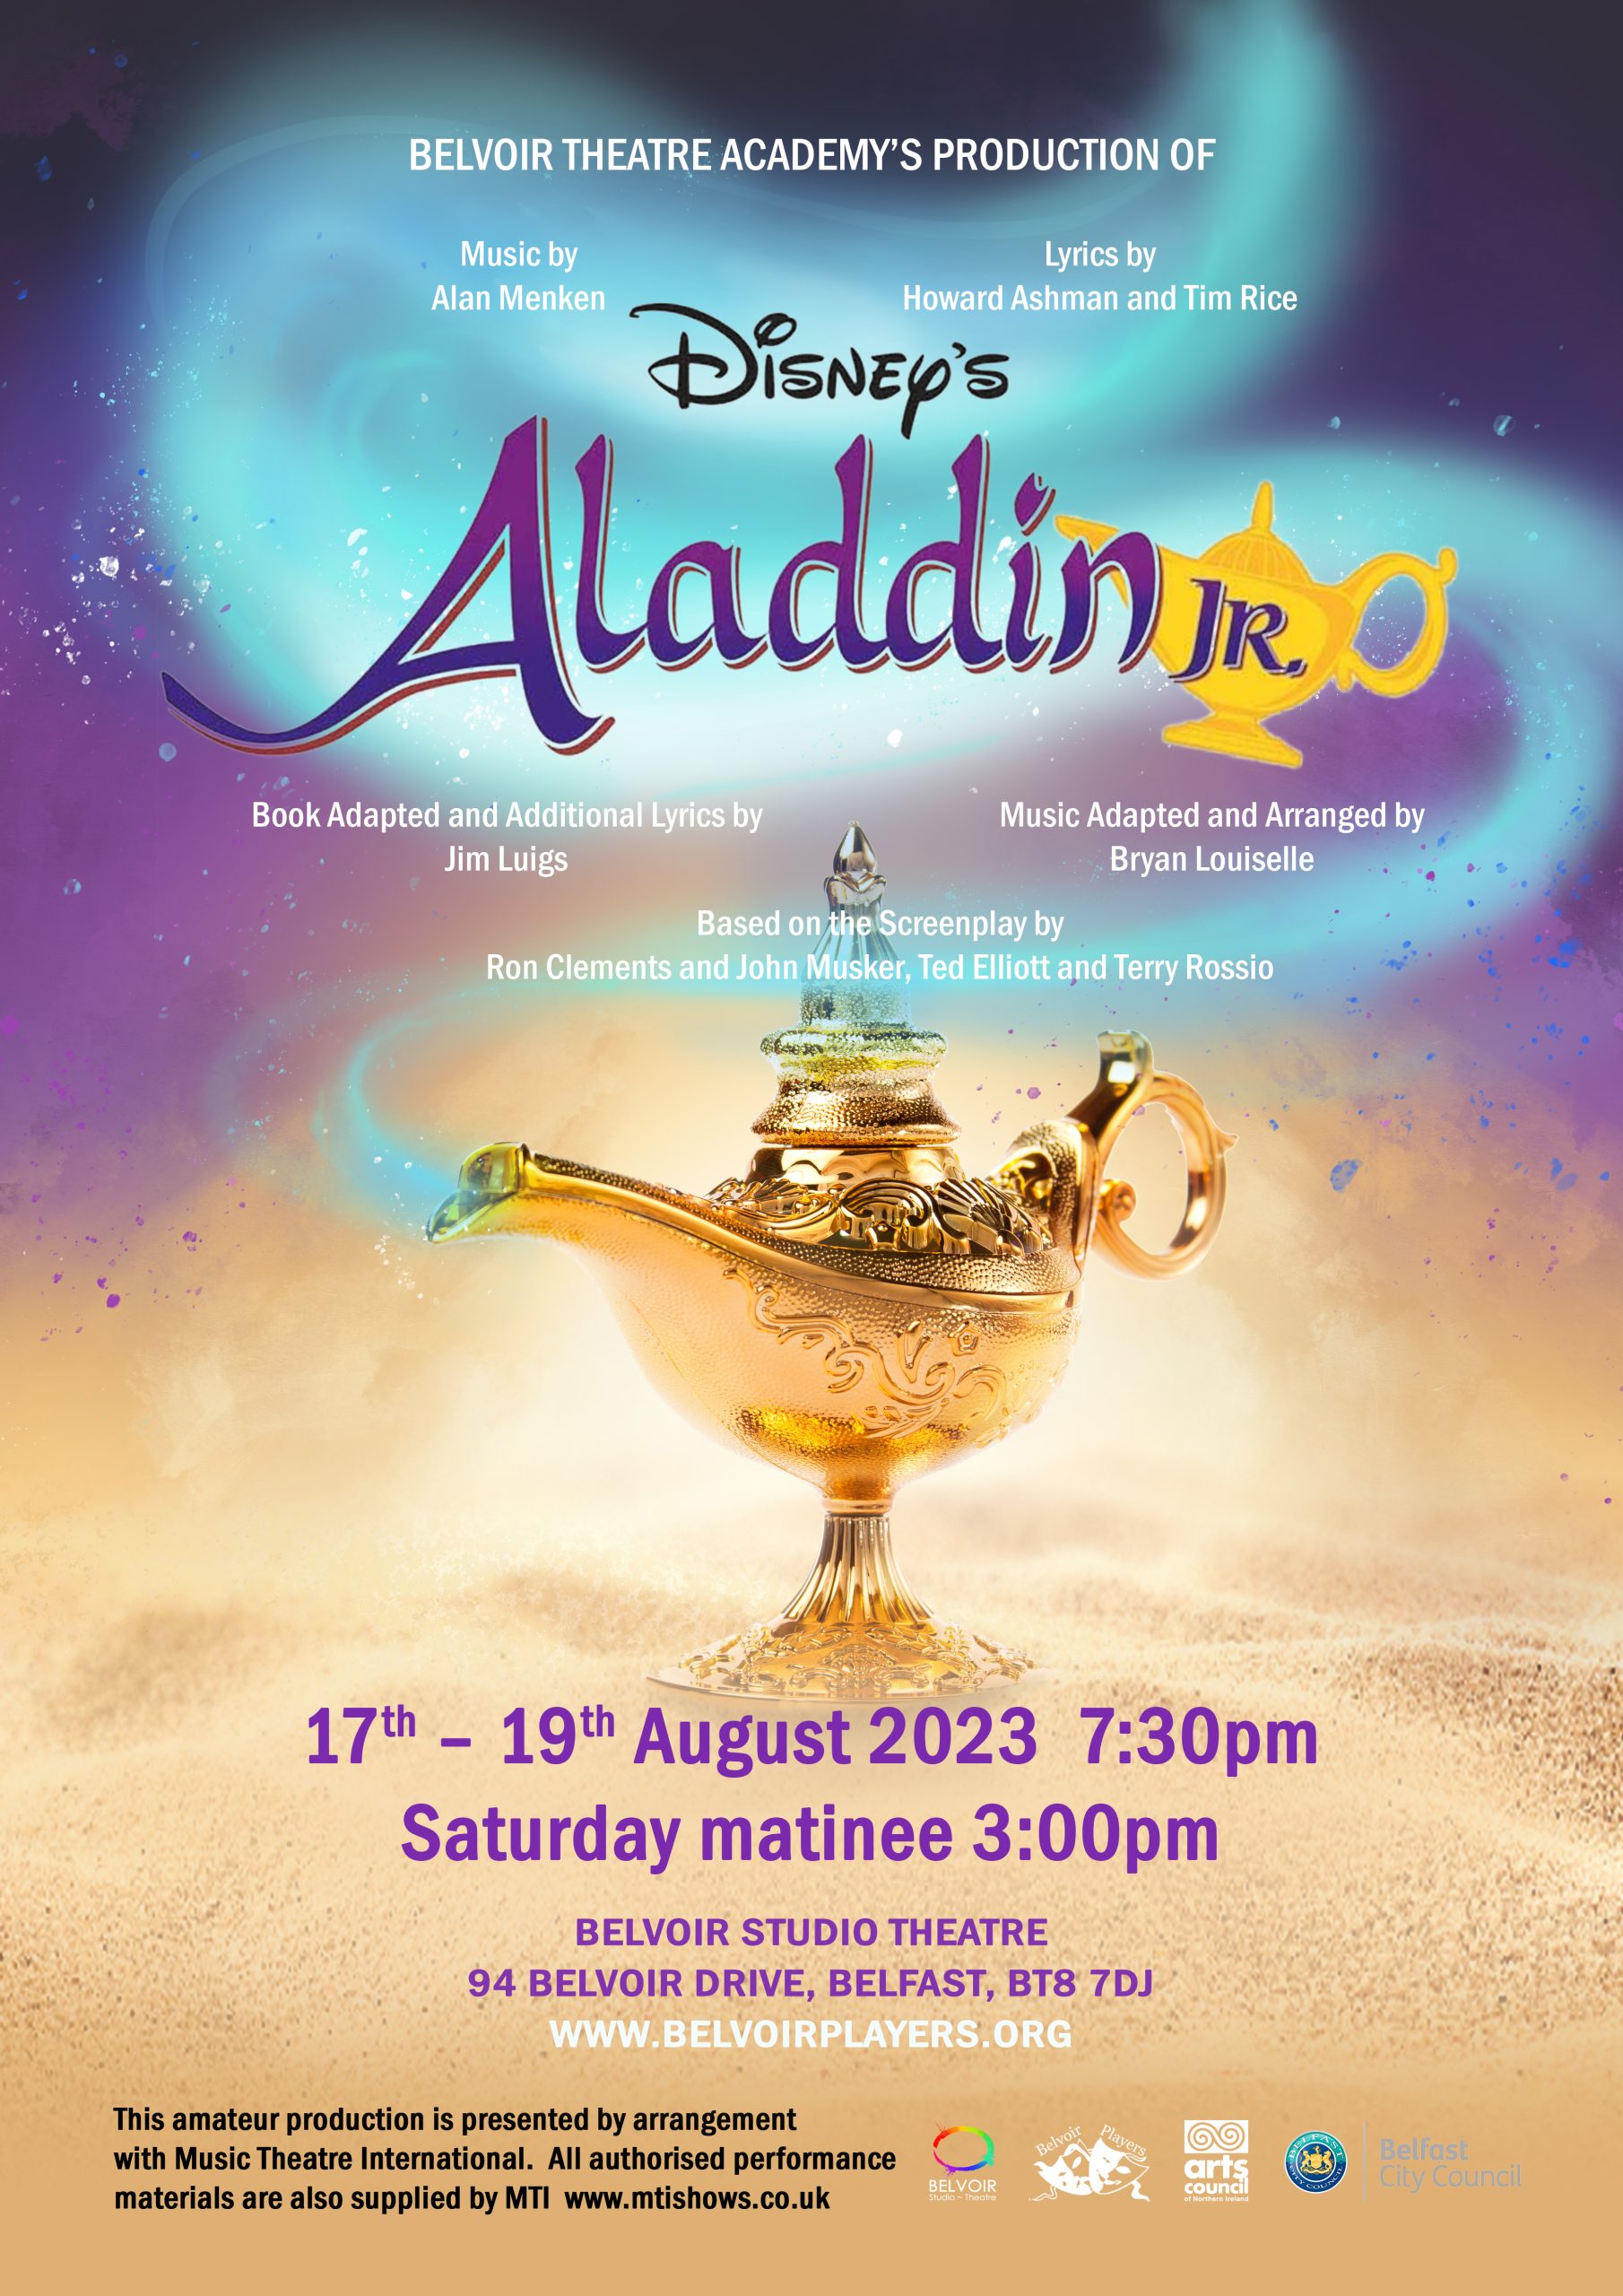 Swirling smoke and a genie's lamp with the event details